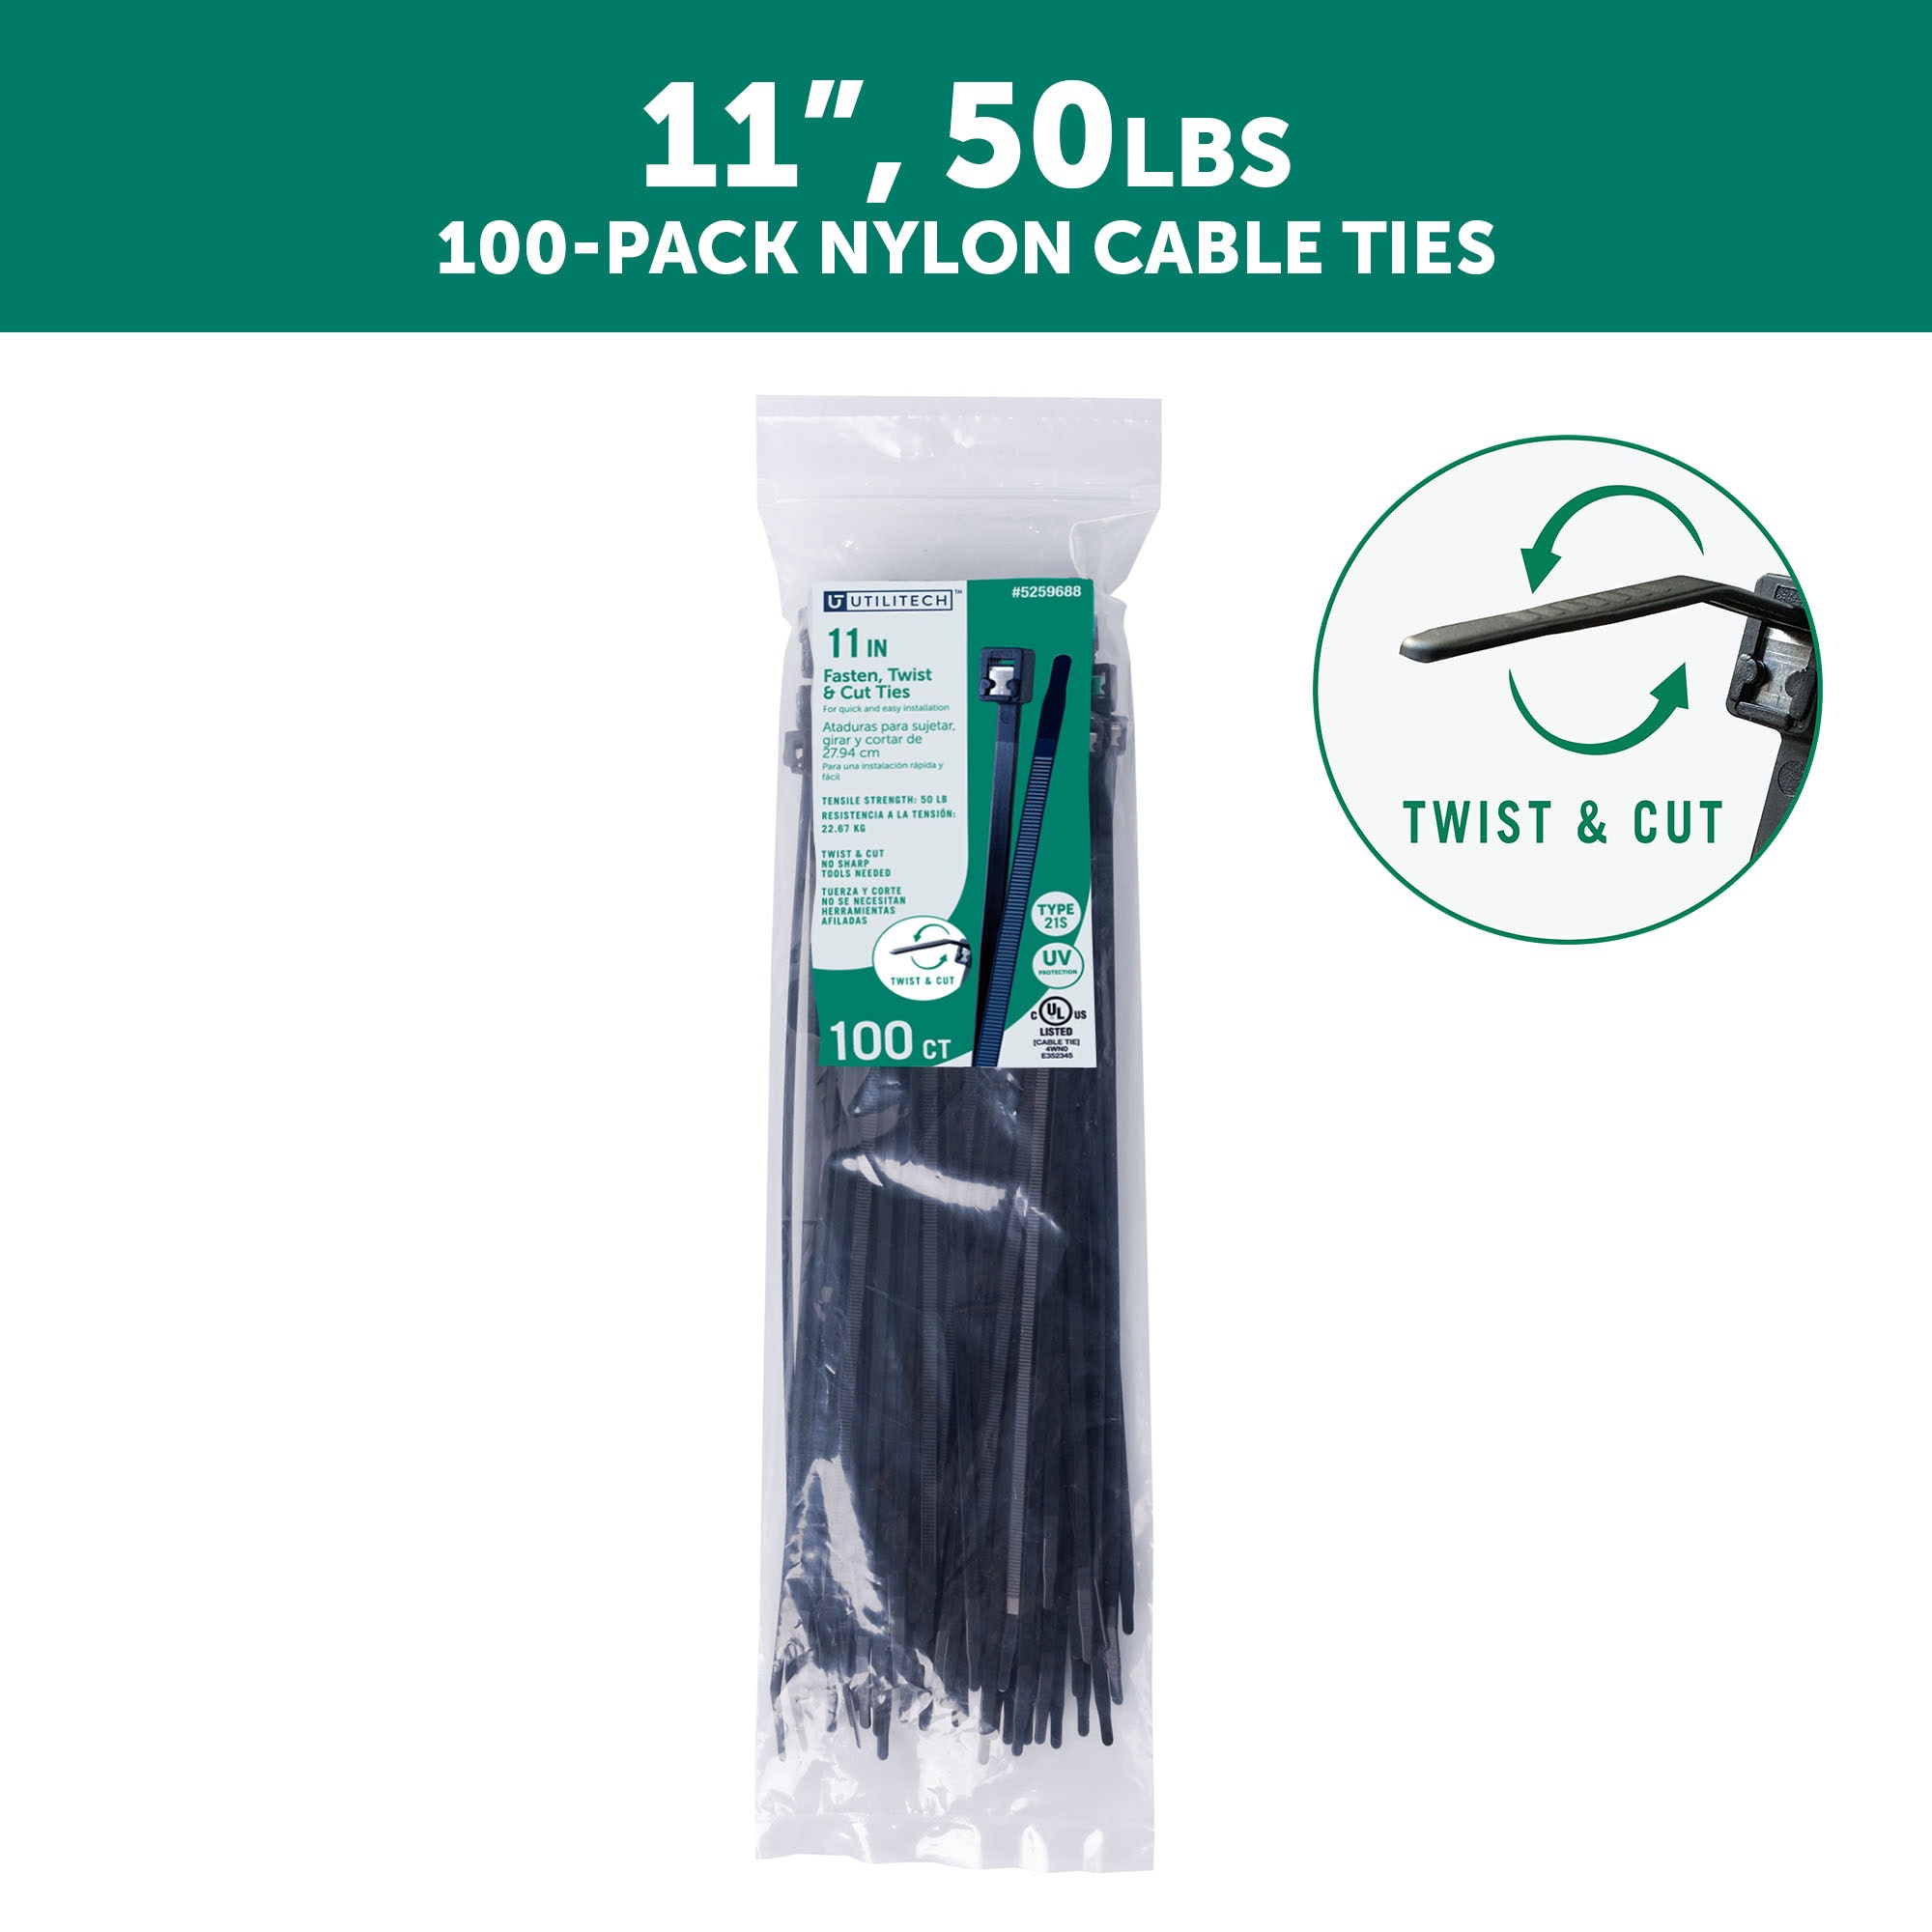 Utilitech 11-in Nylon Twist and Cut Cable Ties Black with UV Protection (100-Pack)